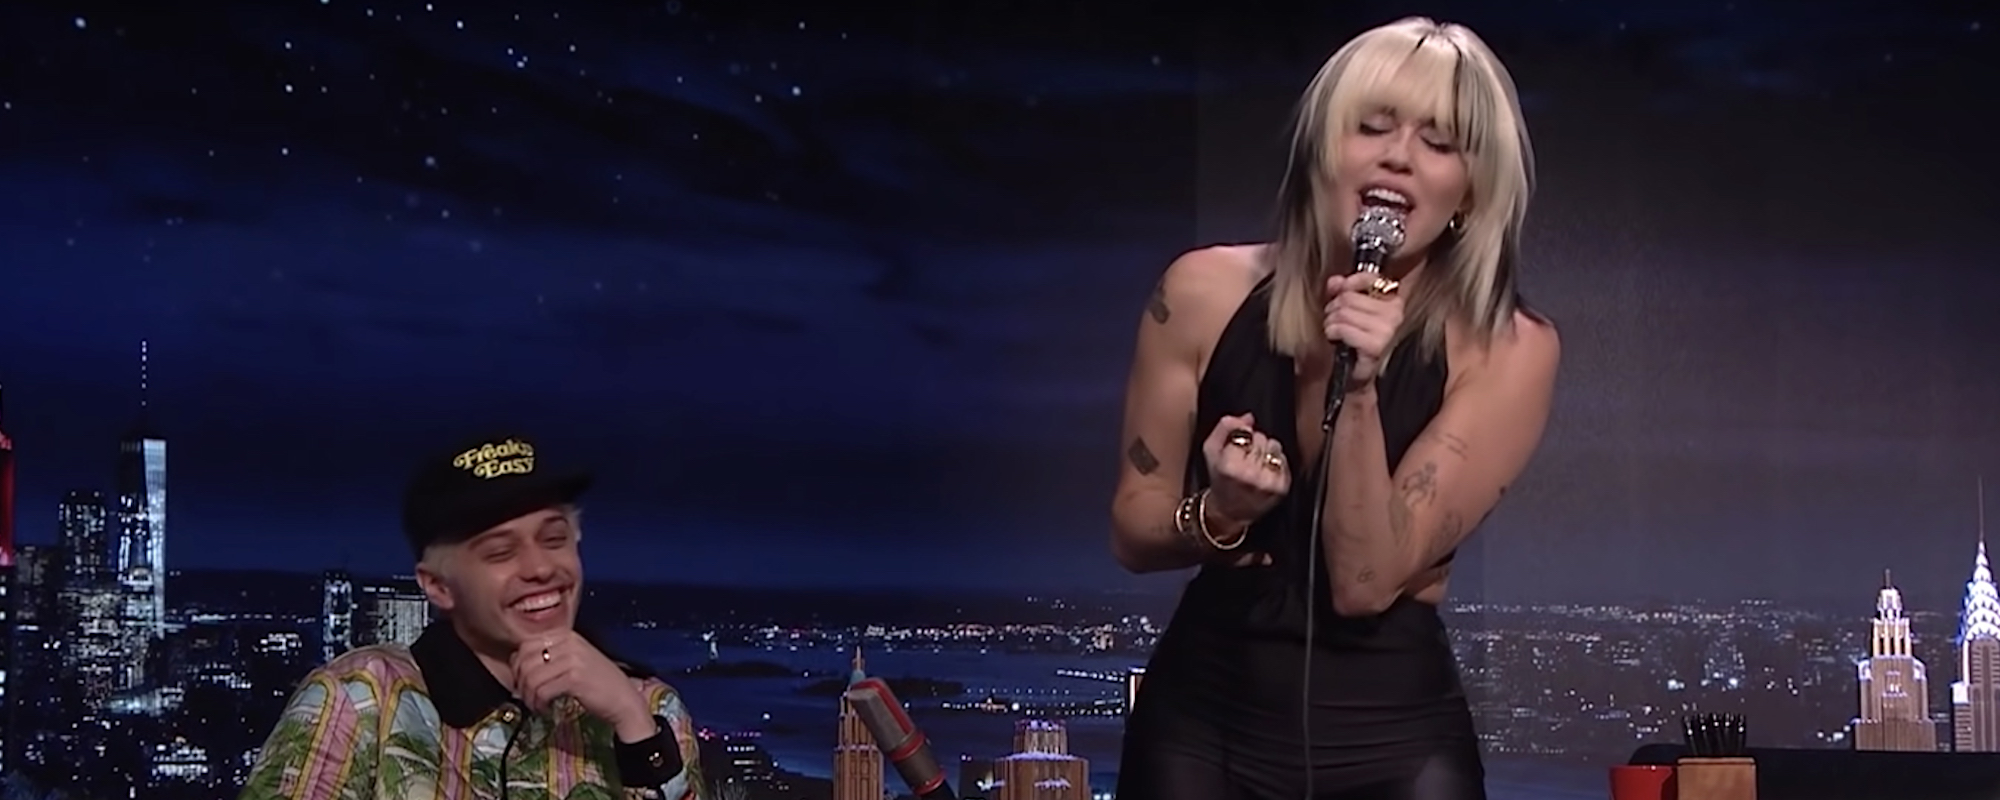 Miley Cyrus Serenades Pete Davidson on ‘Jimmy Fallon’ with “It Should Have Been Me”